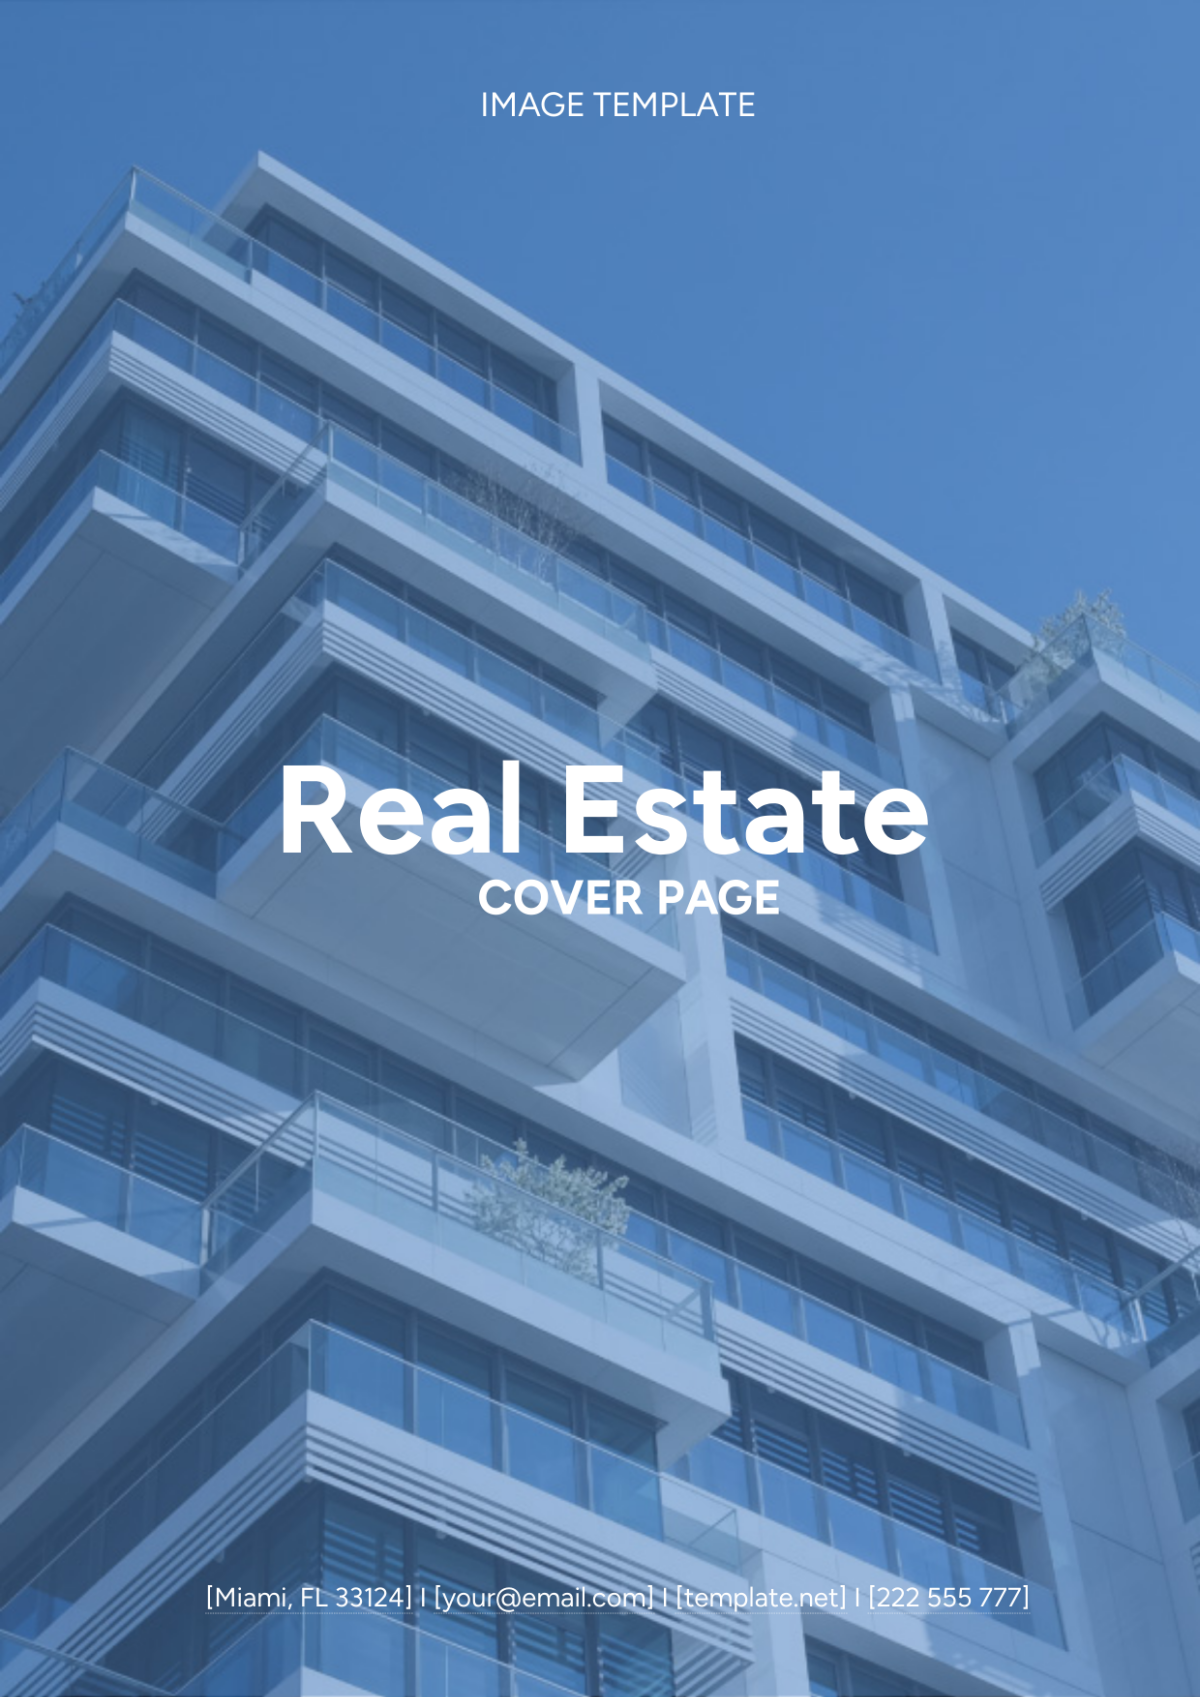 Real Estate Cover Page Image